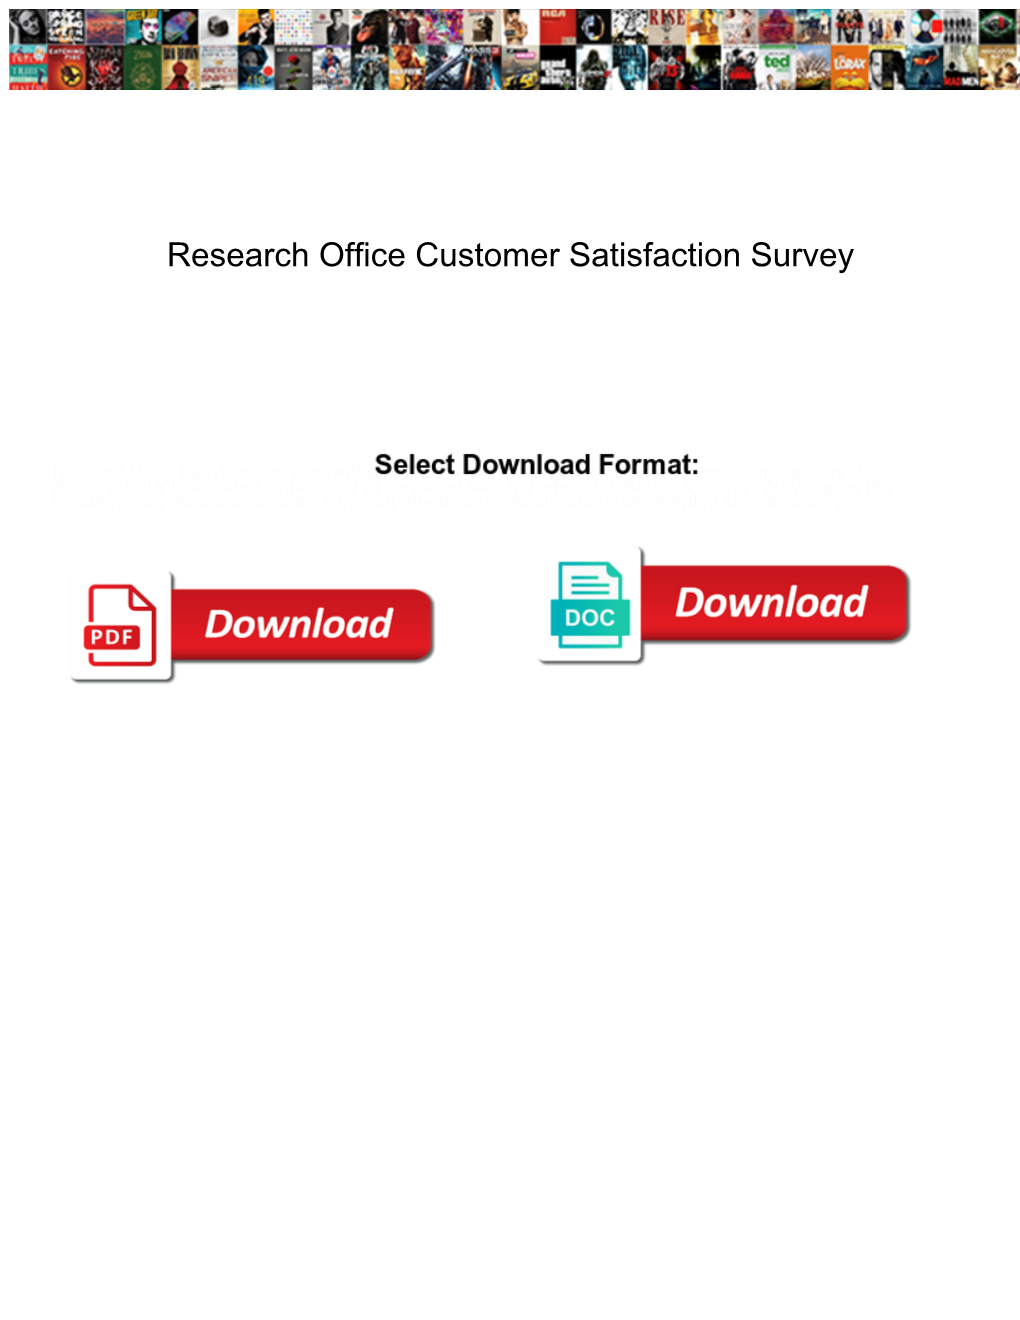 Research Office Customer Satisfaction Survey